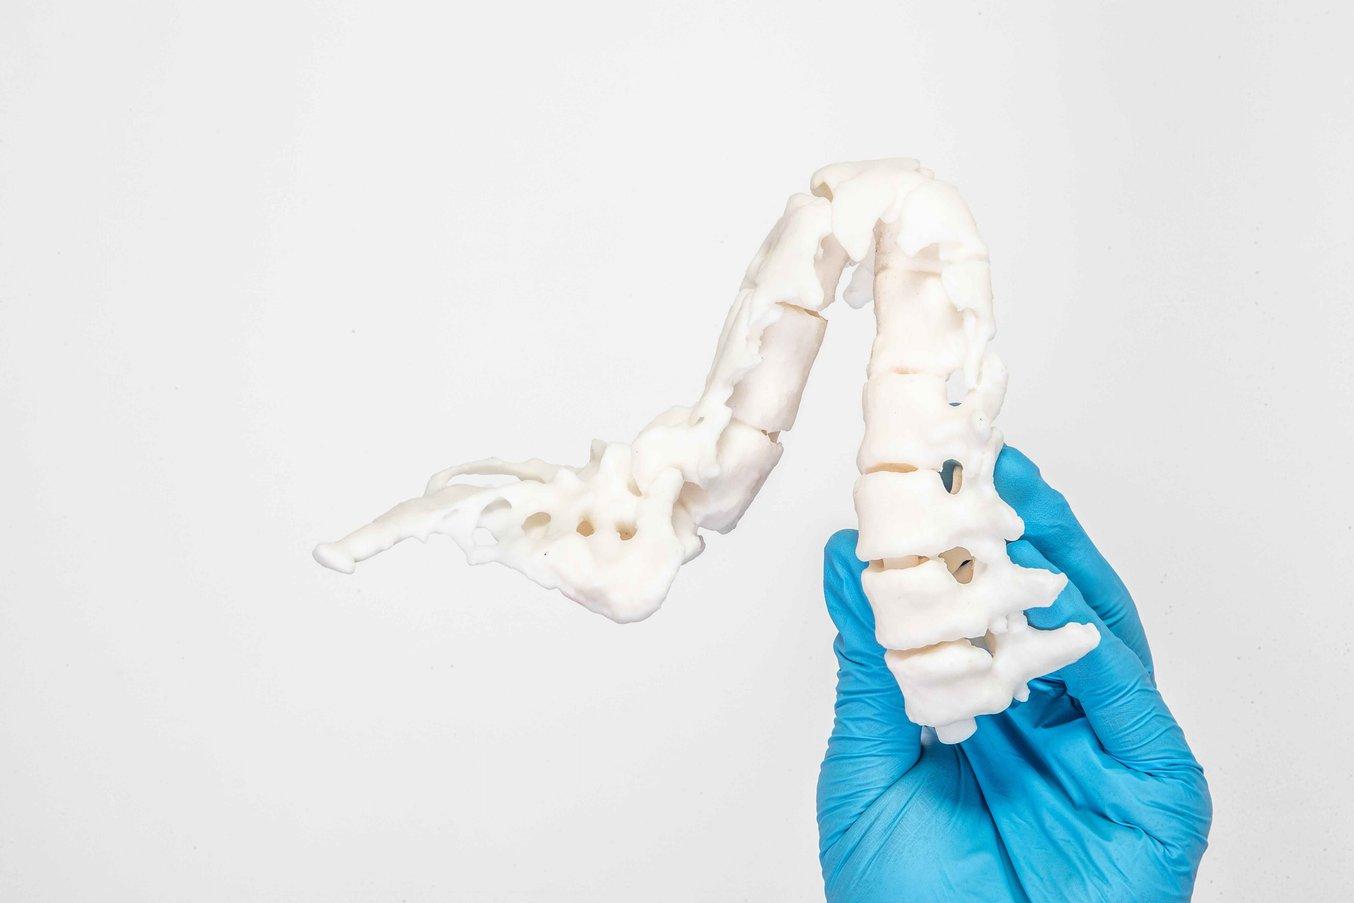 Patient-specific anatomical models: 3d printed spine